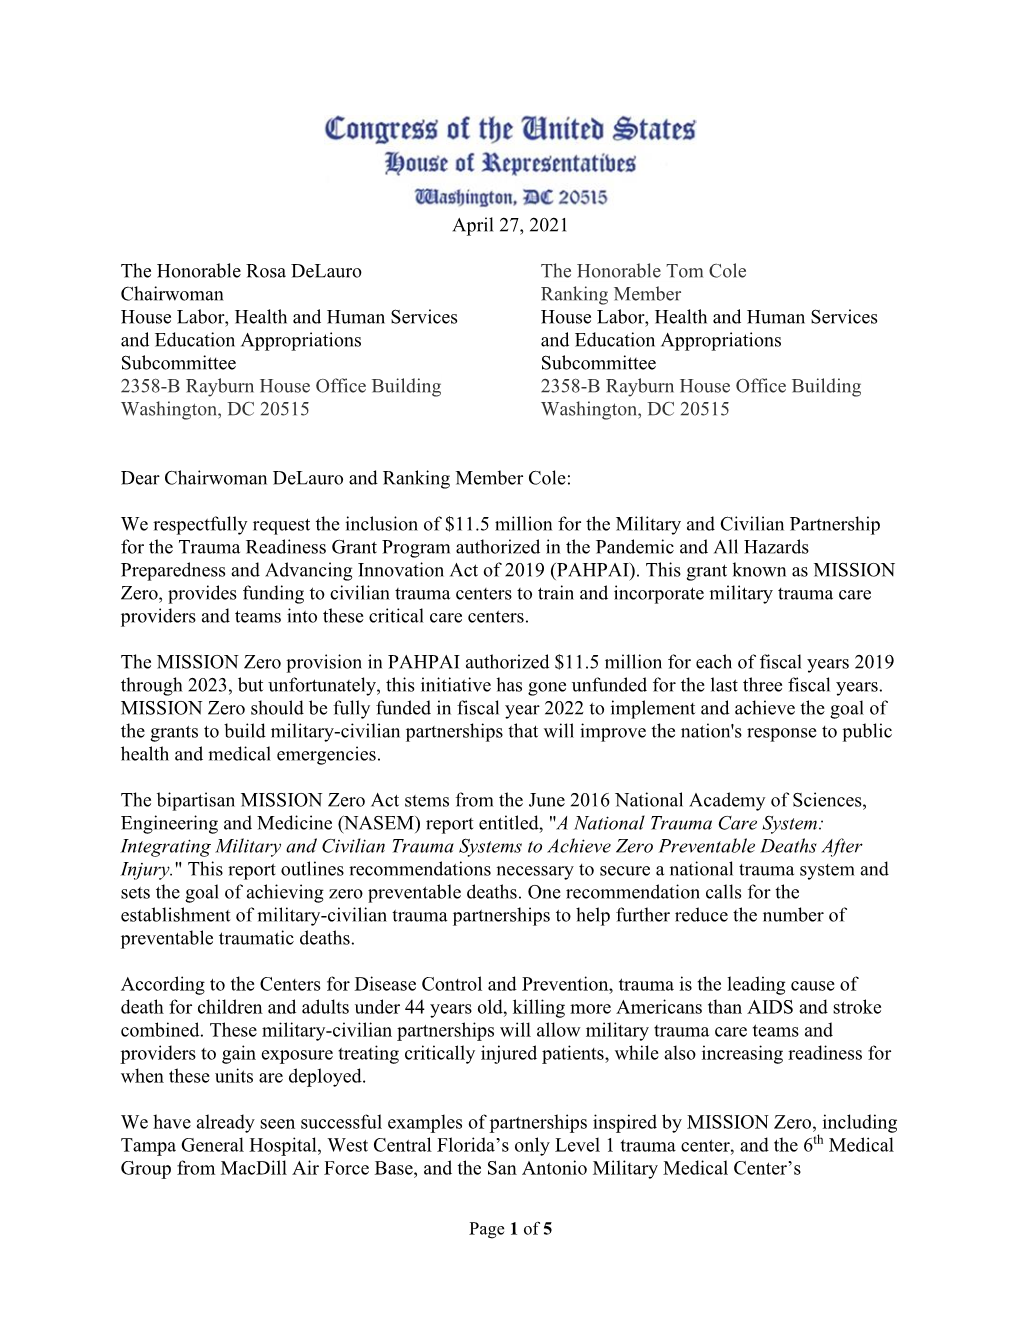 House MISSION ZERO Appropriations Letter Led by Reps. Burgess And